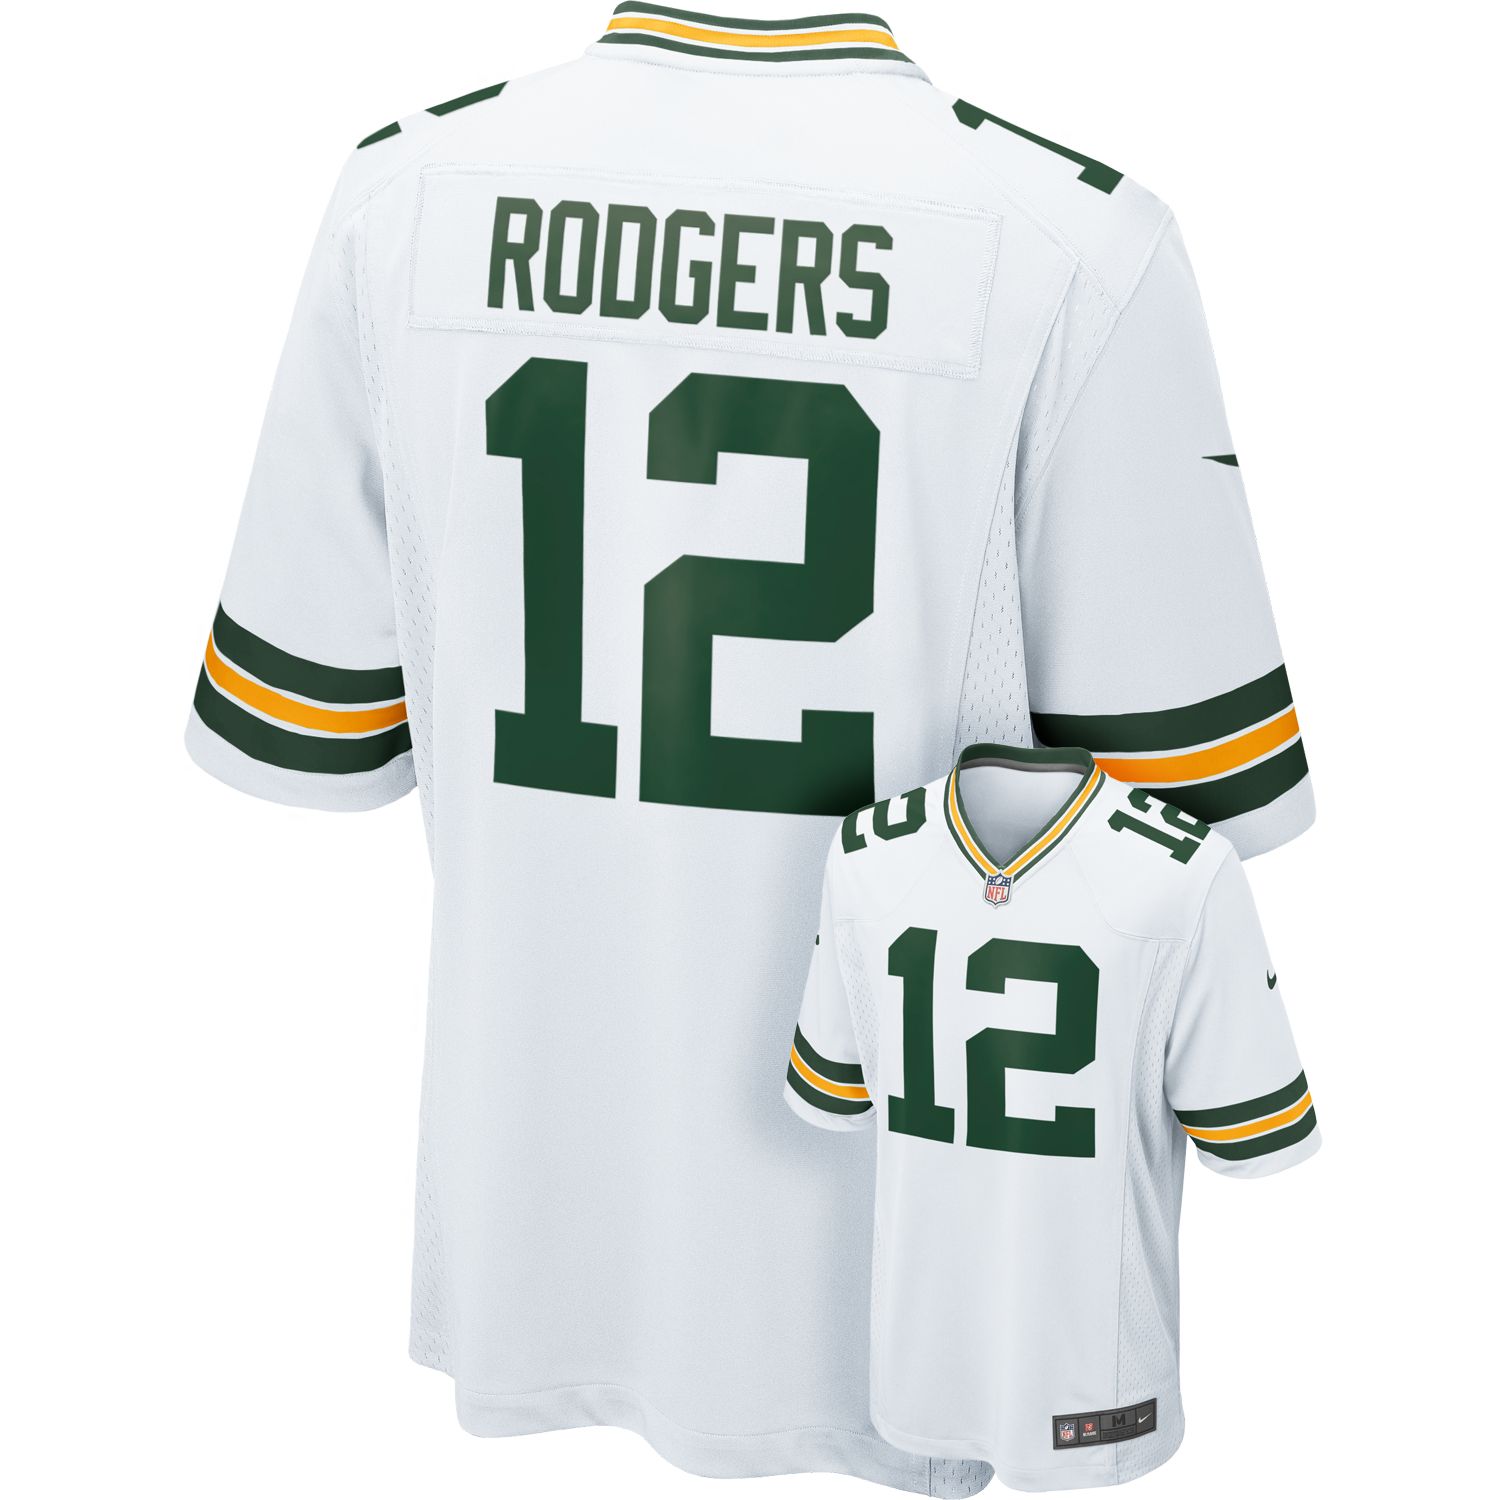 aaron rodgers stitched jersey